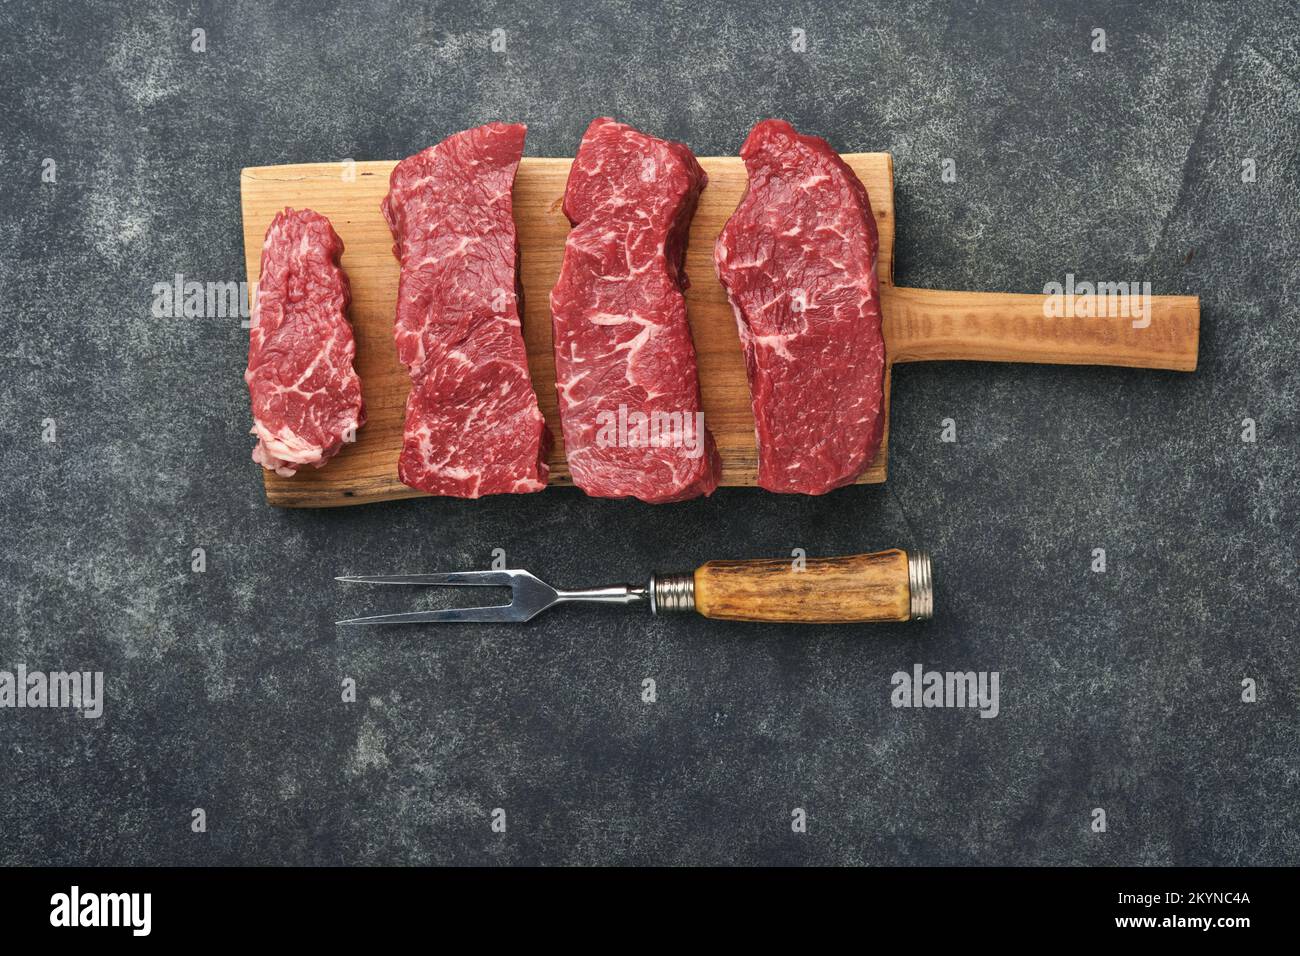 Raw steaks. Top blade steaks on wood burning board with spices, rosemary, vegetables and ingredients for cooking on black background. Top view. Copy s Stock Photo